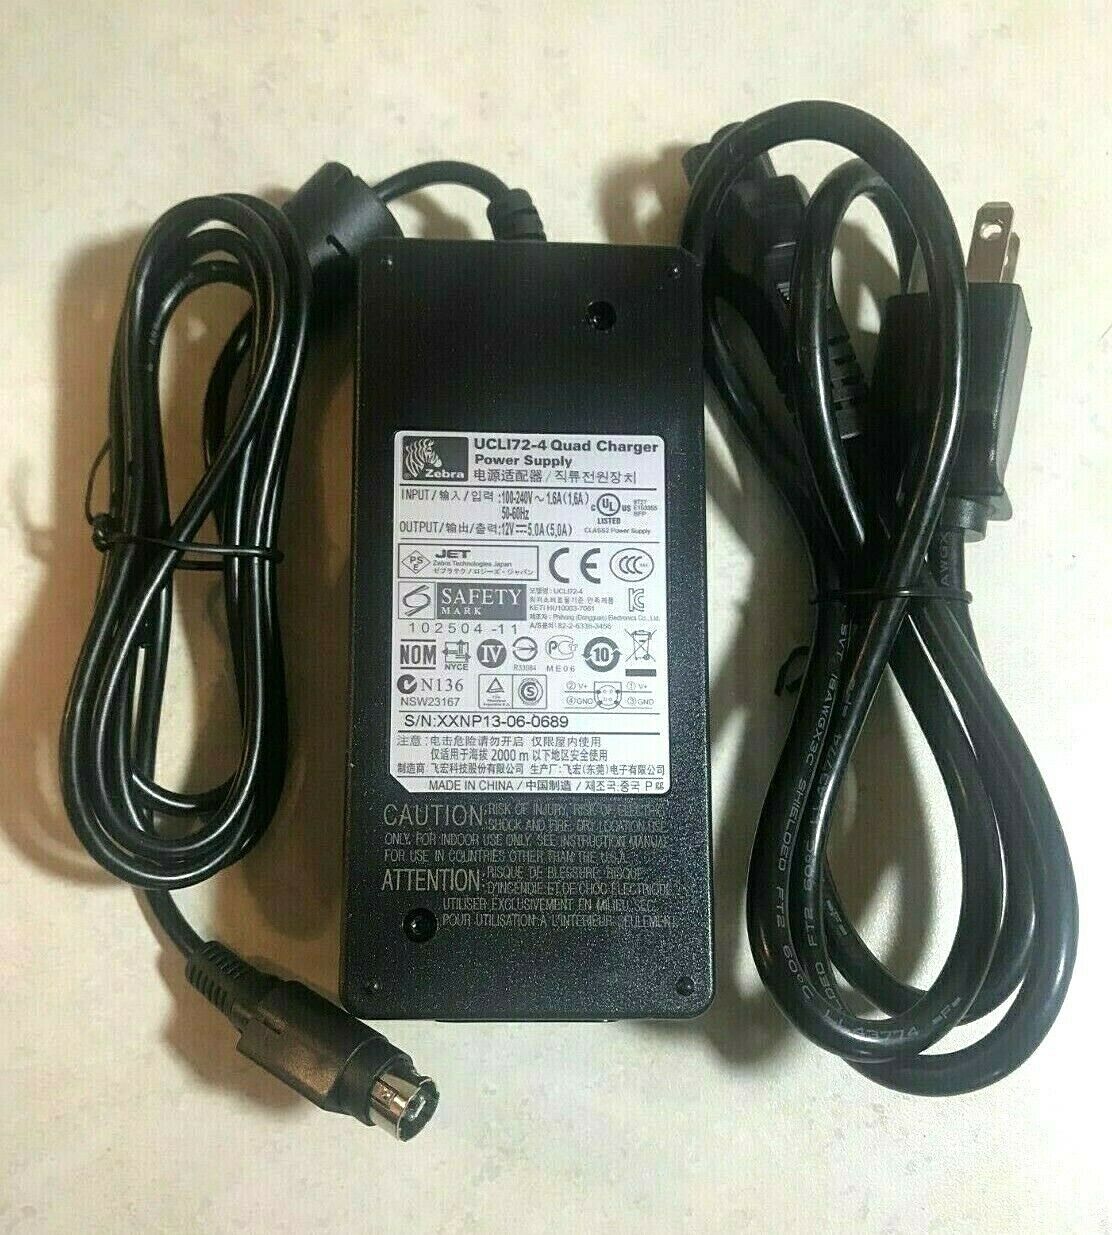 Zebra UCL172-4 Quad Charger AC DC Adapter Power Supply 60W - Genuine OEM Type: A - Click Image to Close